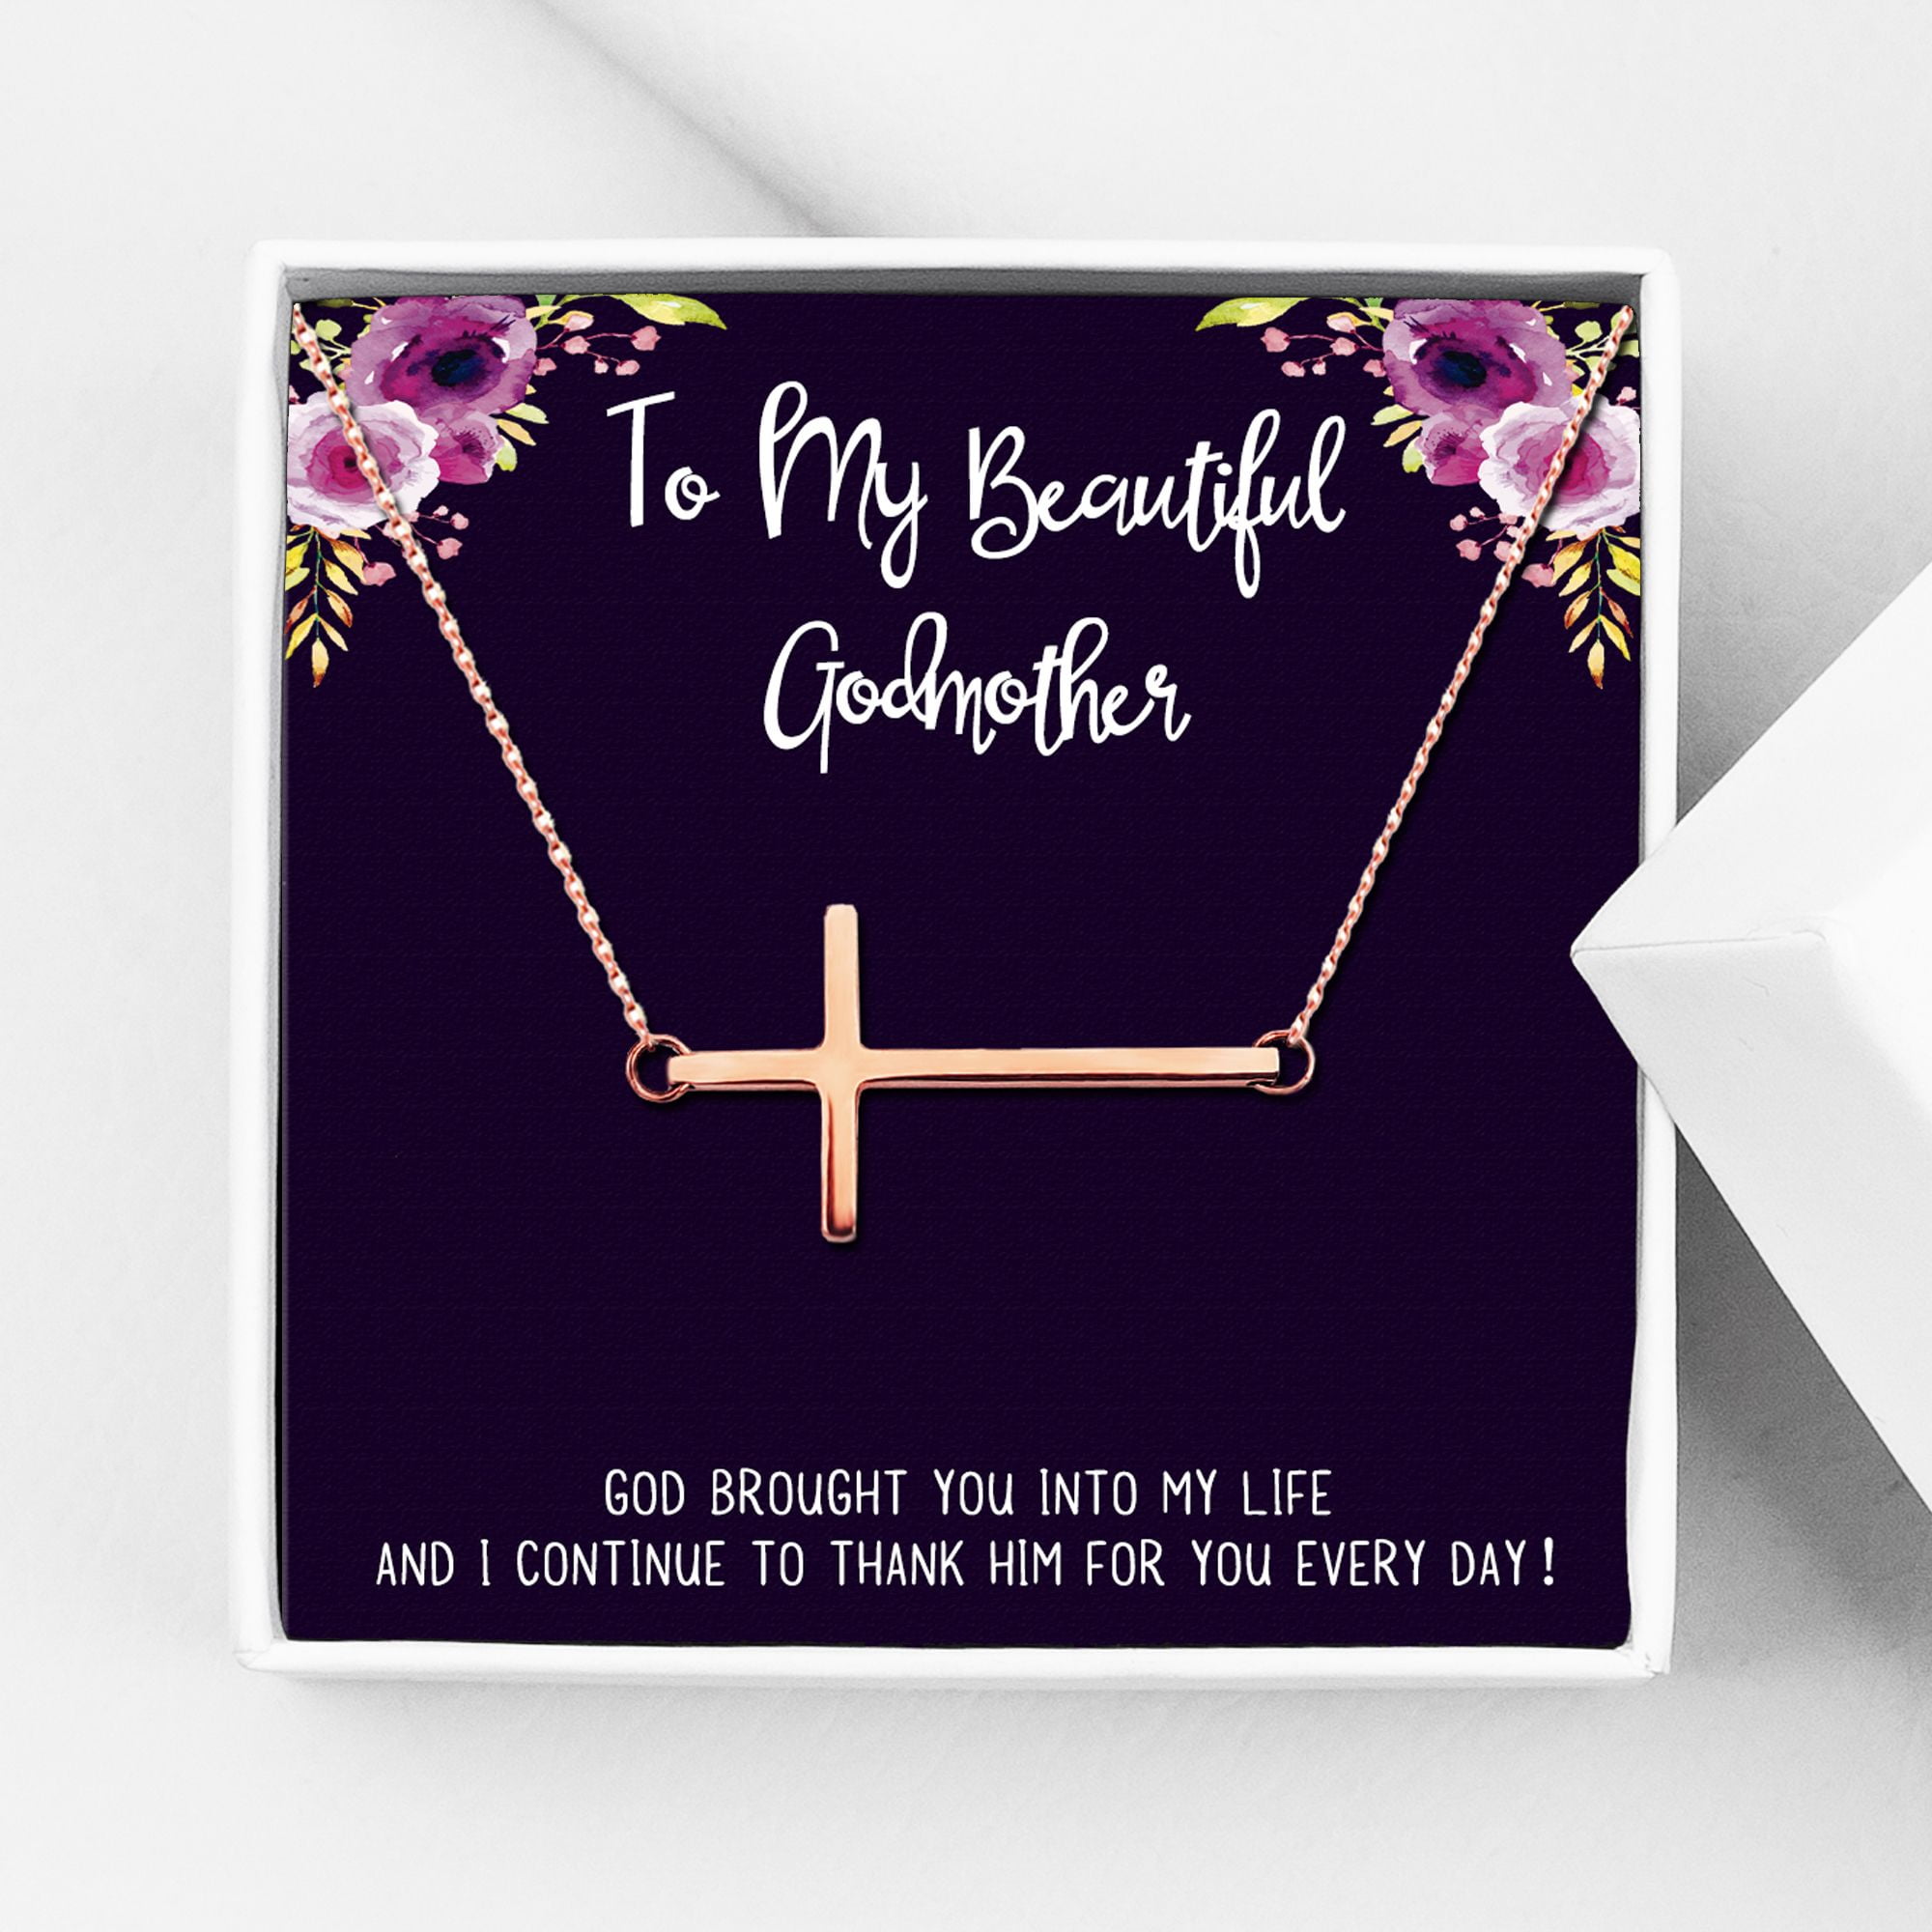 Anavia - Anavia Godmother Gift, Godmother Necklace, Jewelry Gift, Gift